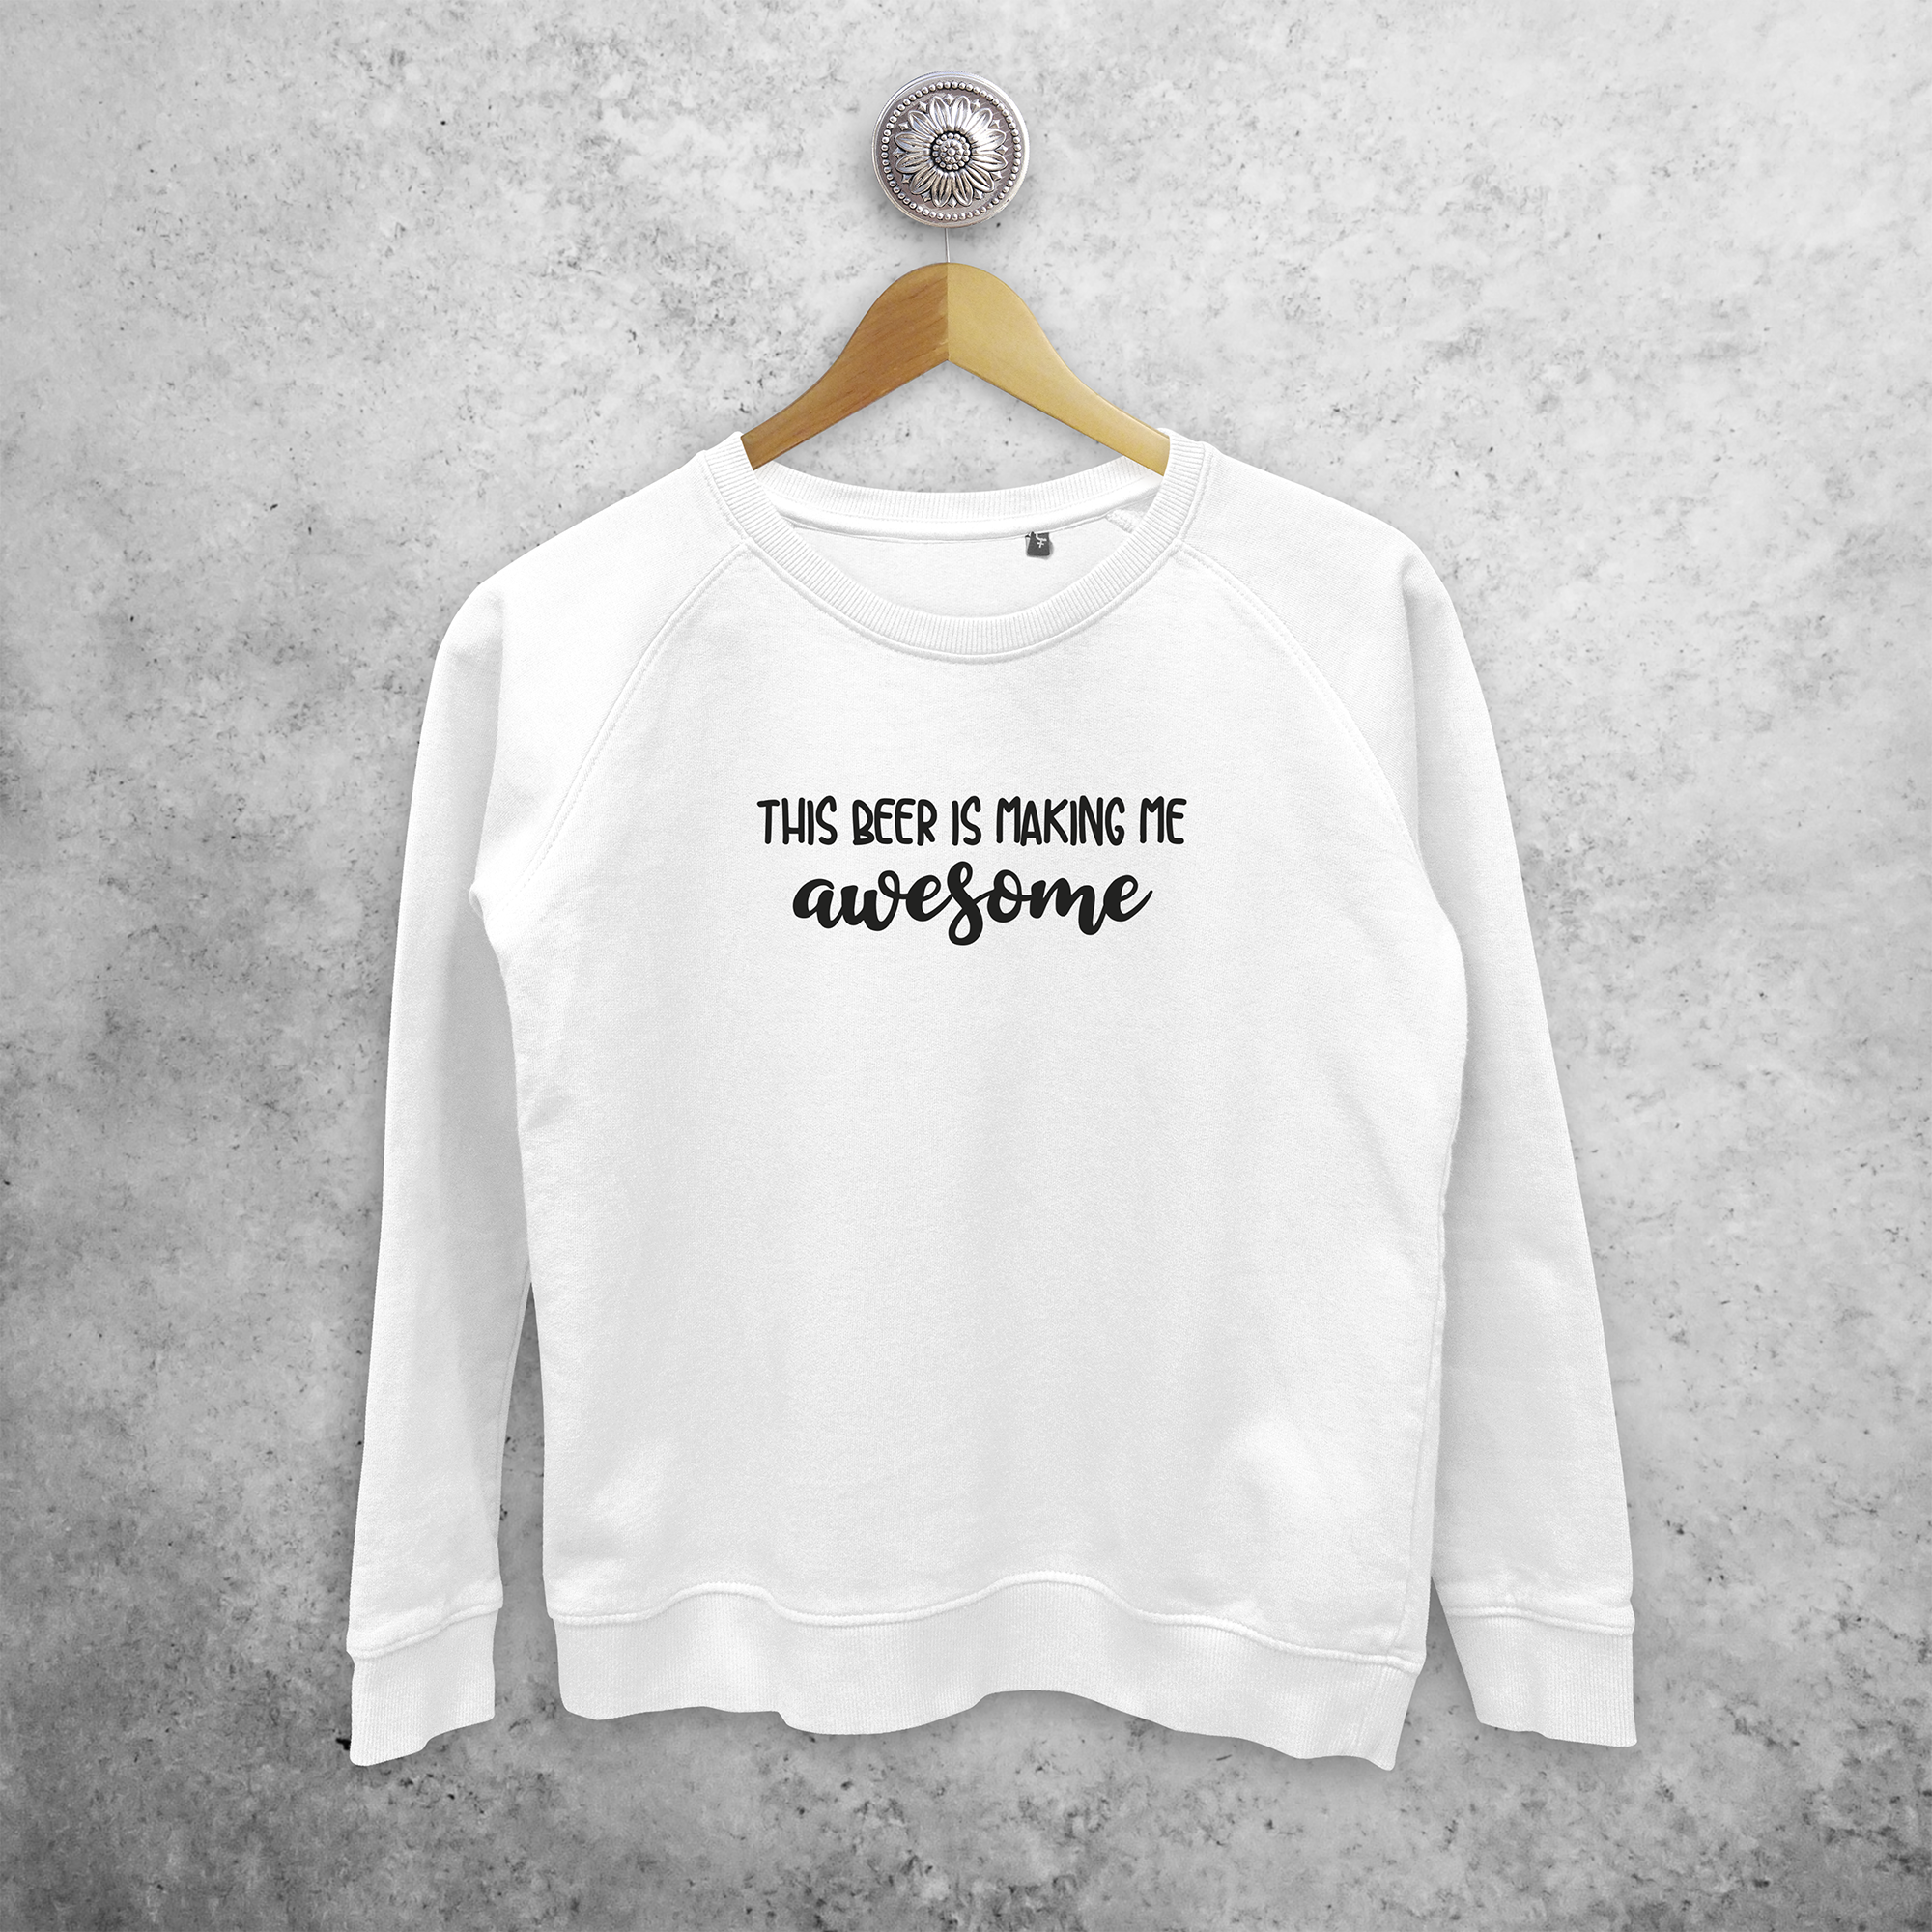 'This beer is making me awesome' sweater